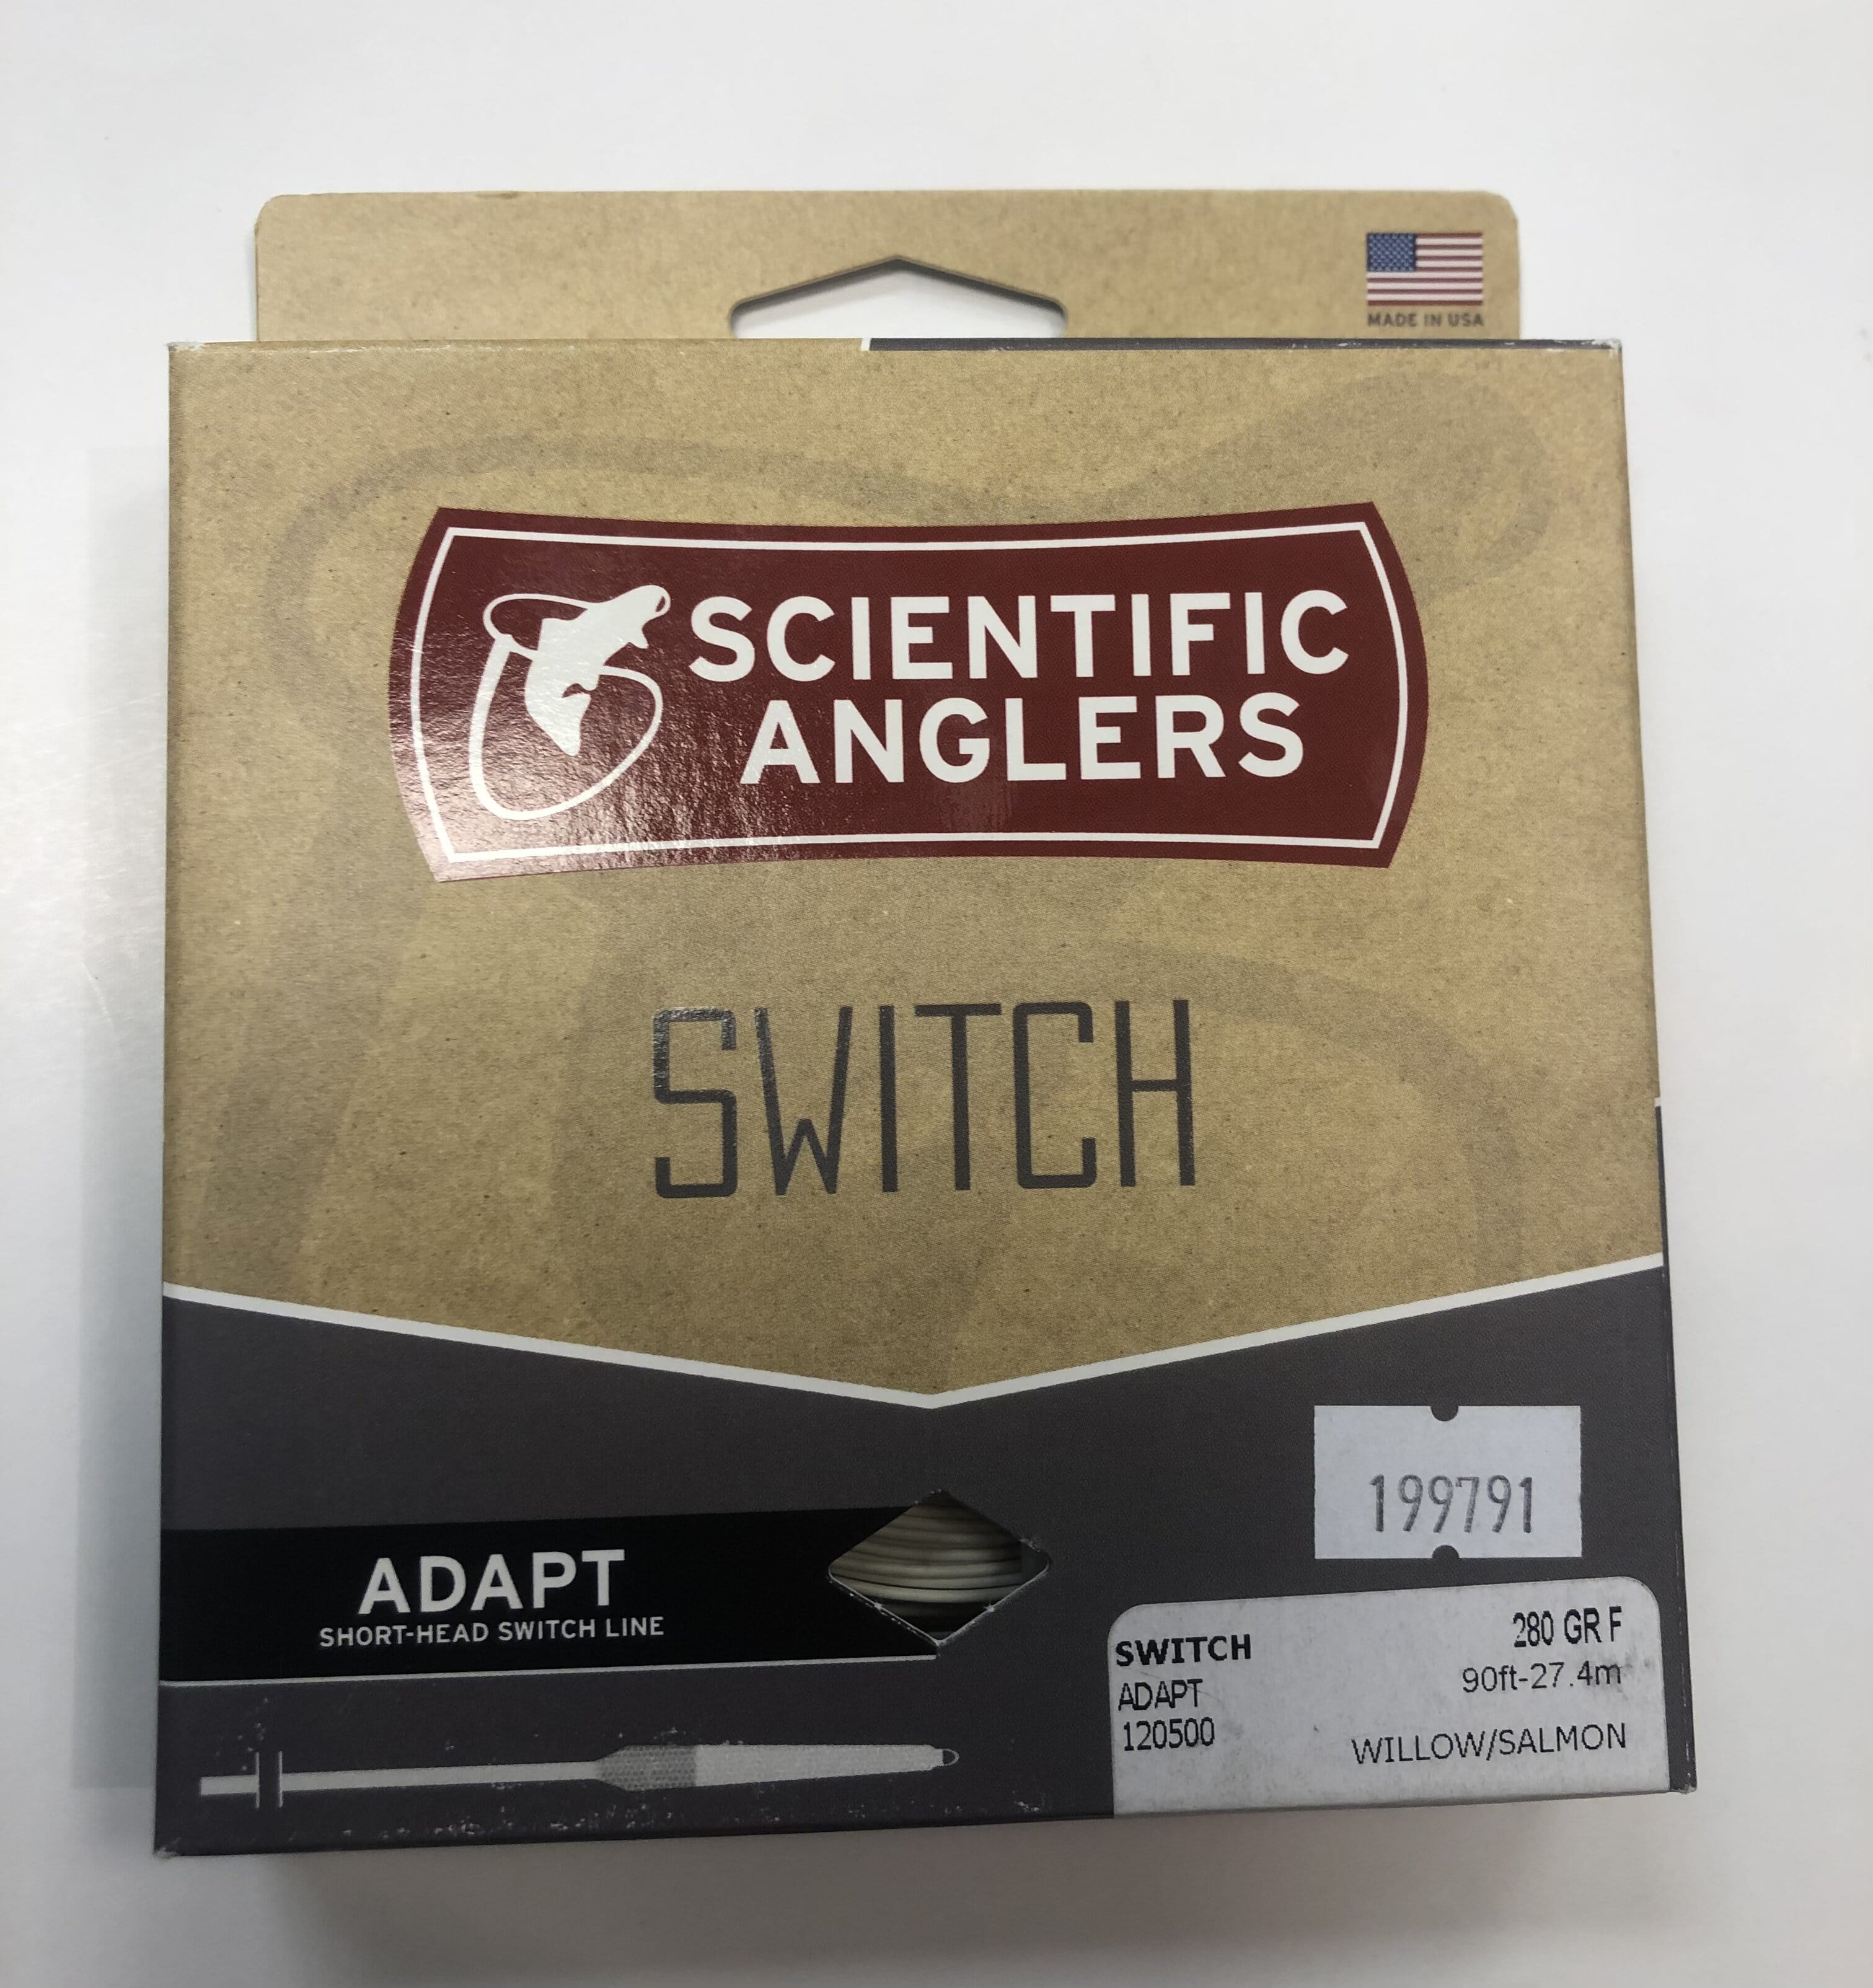 Scientific Anglers ADAPT Switch 320gr integrated